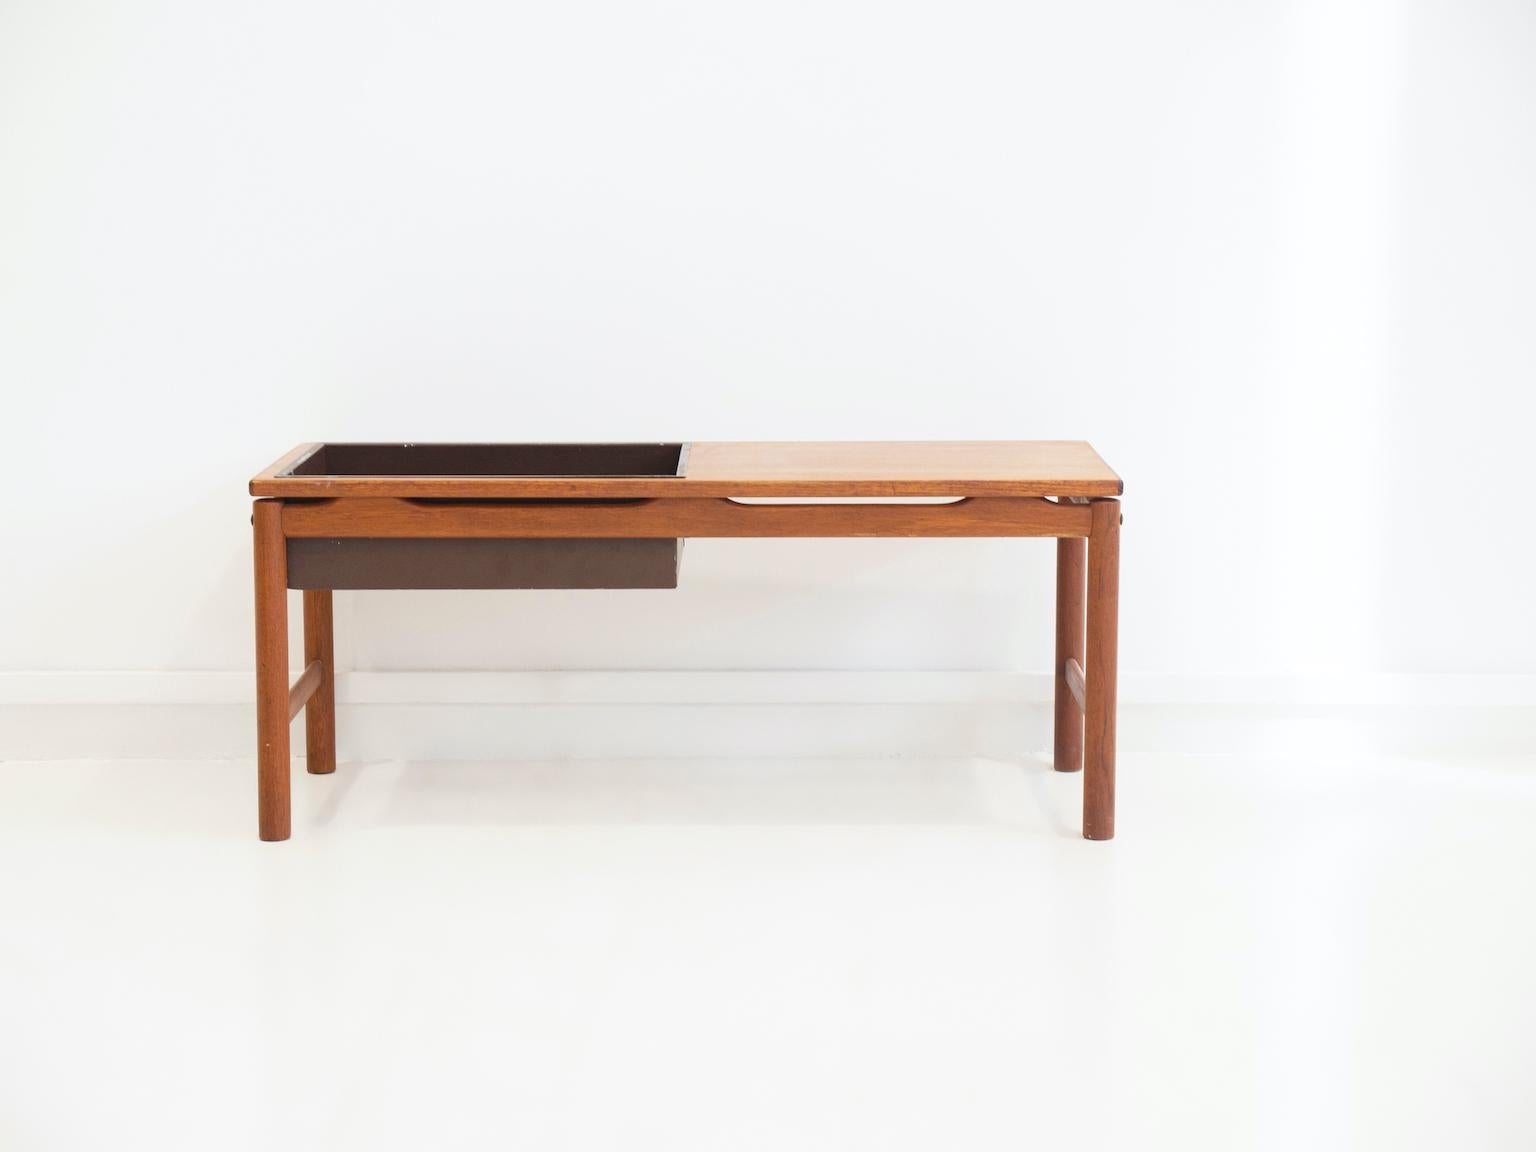 Teak wood table with dark brown painted metal box for plants. Made in Sweden by HMB Rövik Furniture in circa 1960.